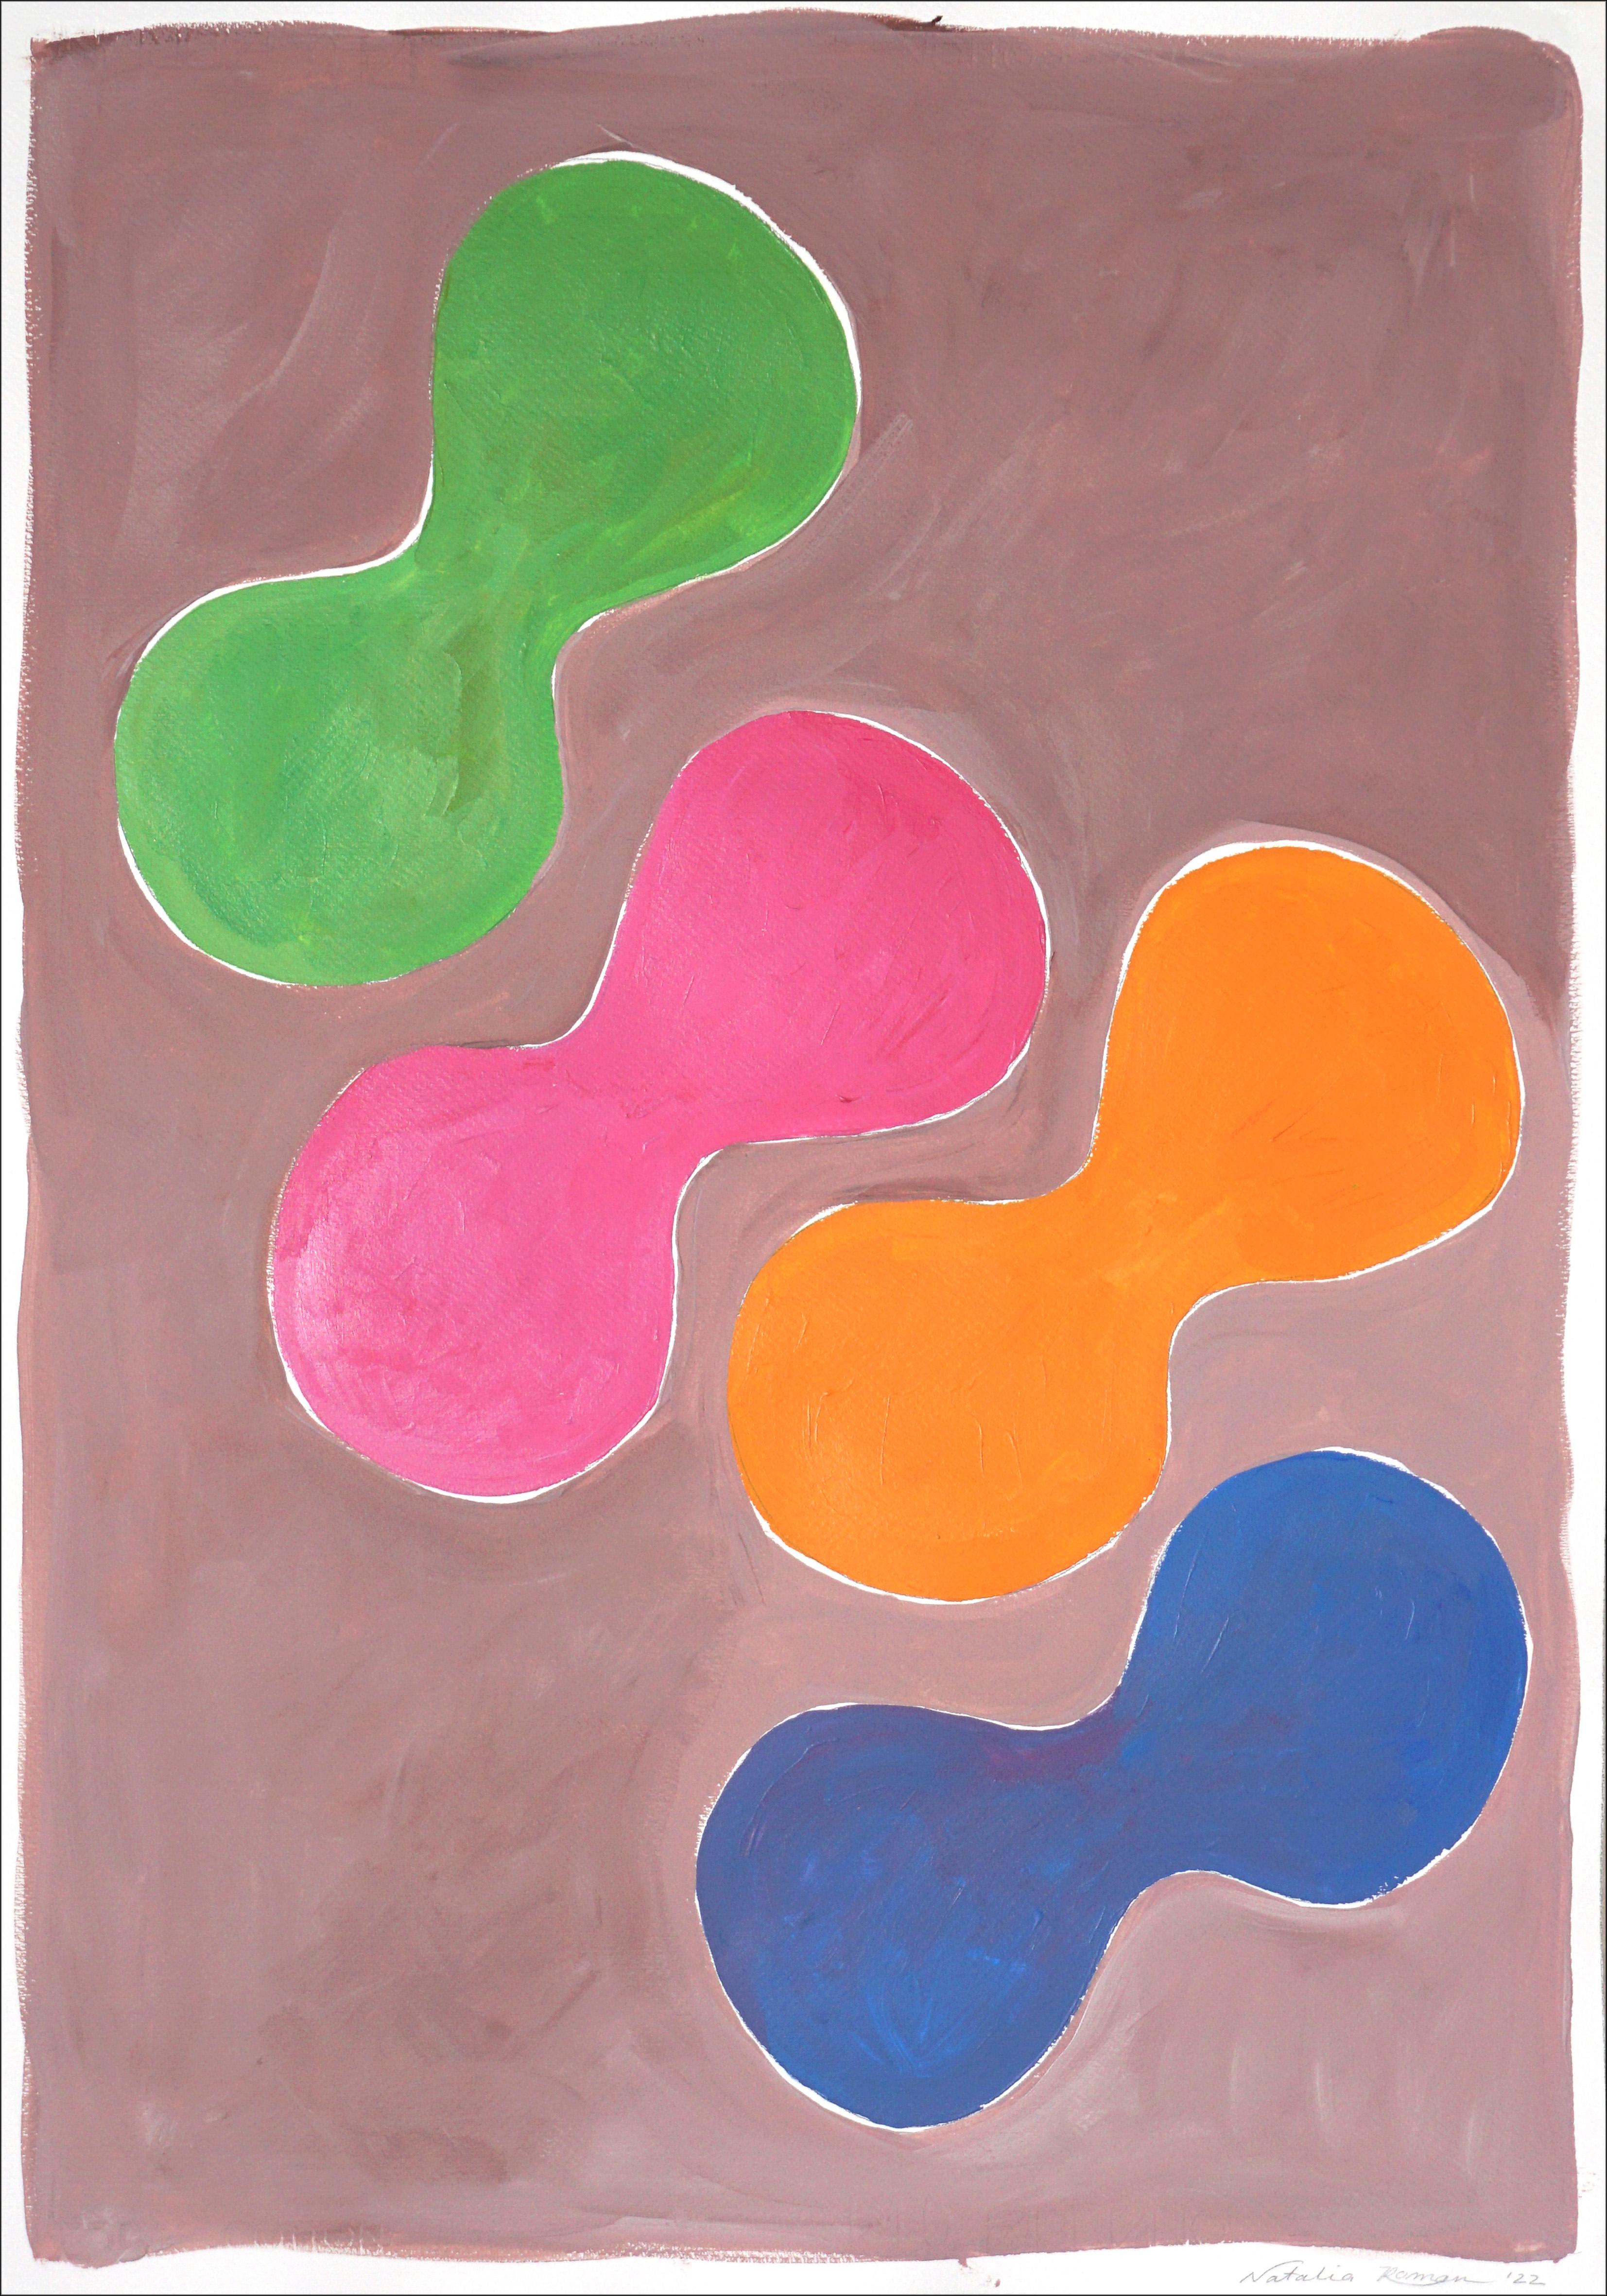 Pools of Colors I, Abstract Sixties Shapes in Green, Pink and Yellow, Organic